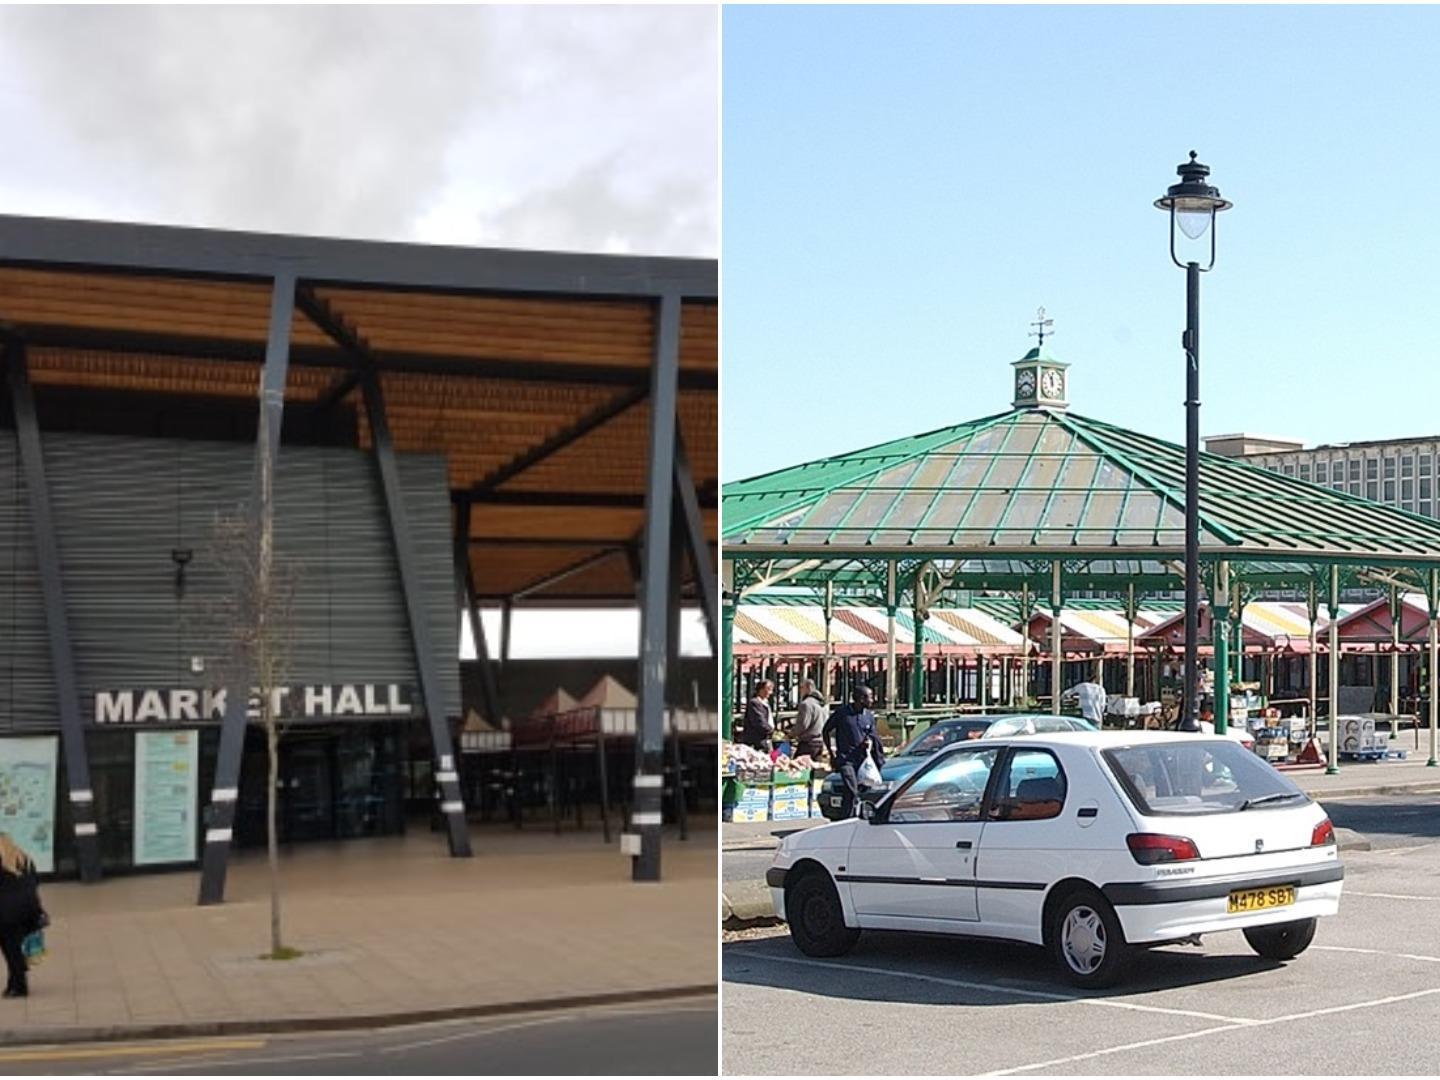 New and old. The 3m Wakefield Market Hall was built in 2008 as part of the regeneration of the Trinity Walk and Marsh Way area. The last trader moved out in 2018.